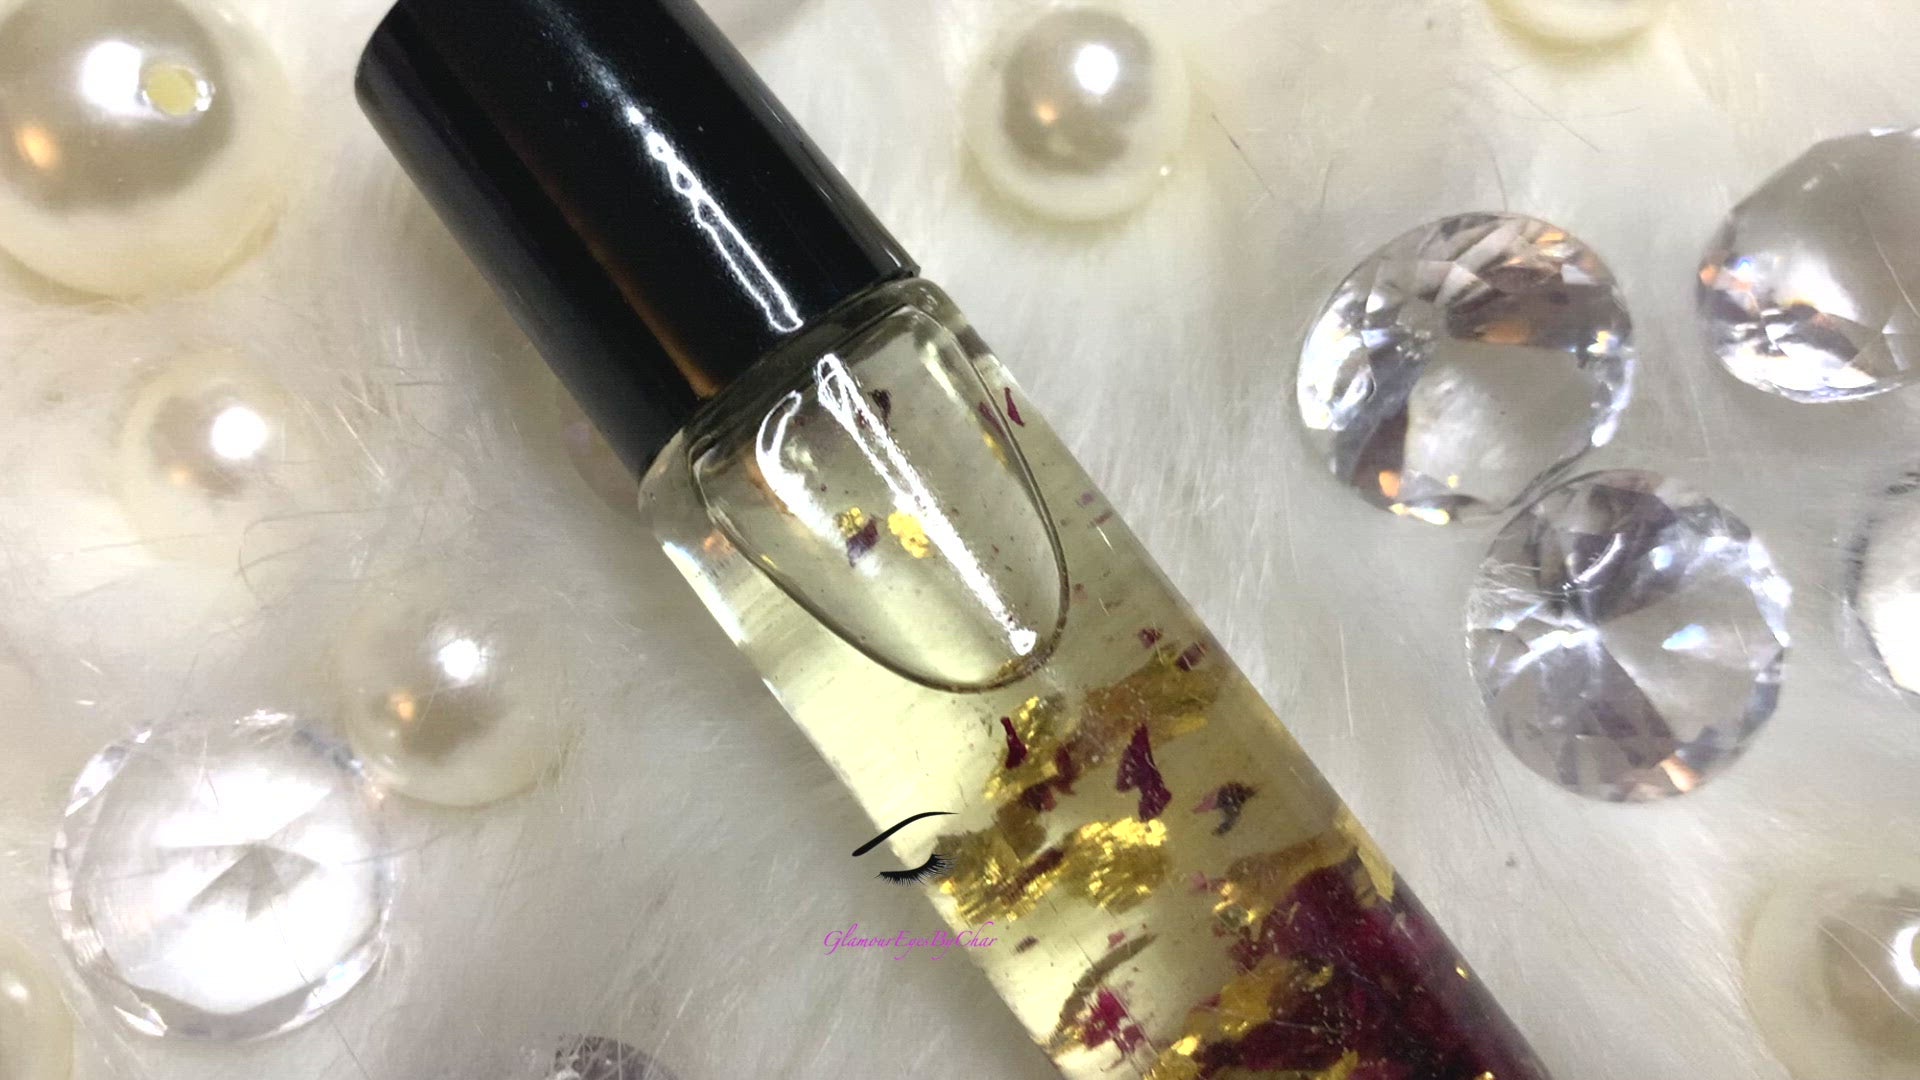 Tired of dry cracked lips? It’s time to add our hydrating lip oil to your lip care routine. Our lip oil is made with premium rich ingredients and infused with 24K gold leaf flakes and edible and organic rose petals. Only the best for our Glamstars✨ Using a lip oil will keep your lips hydrated, luscious, soft and silky smooth. Not only does this lip oil smell amazing, it’ll give your lips high-shine. You can also layer the lip oil over or under other lip products.